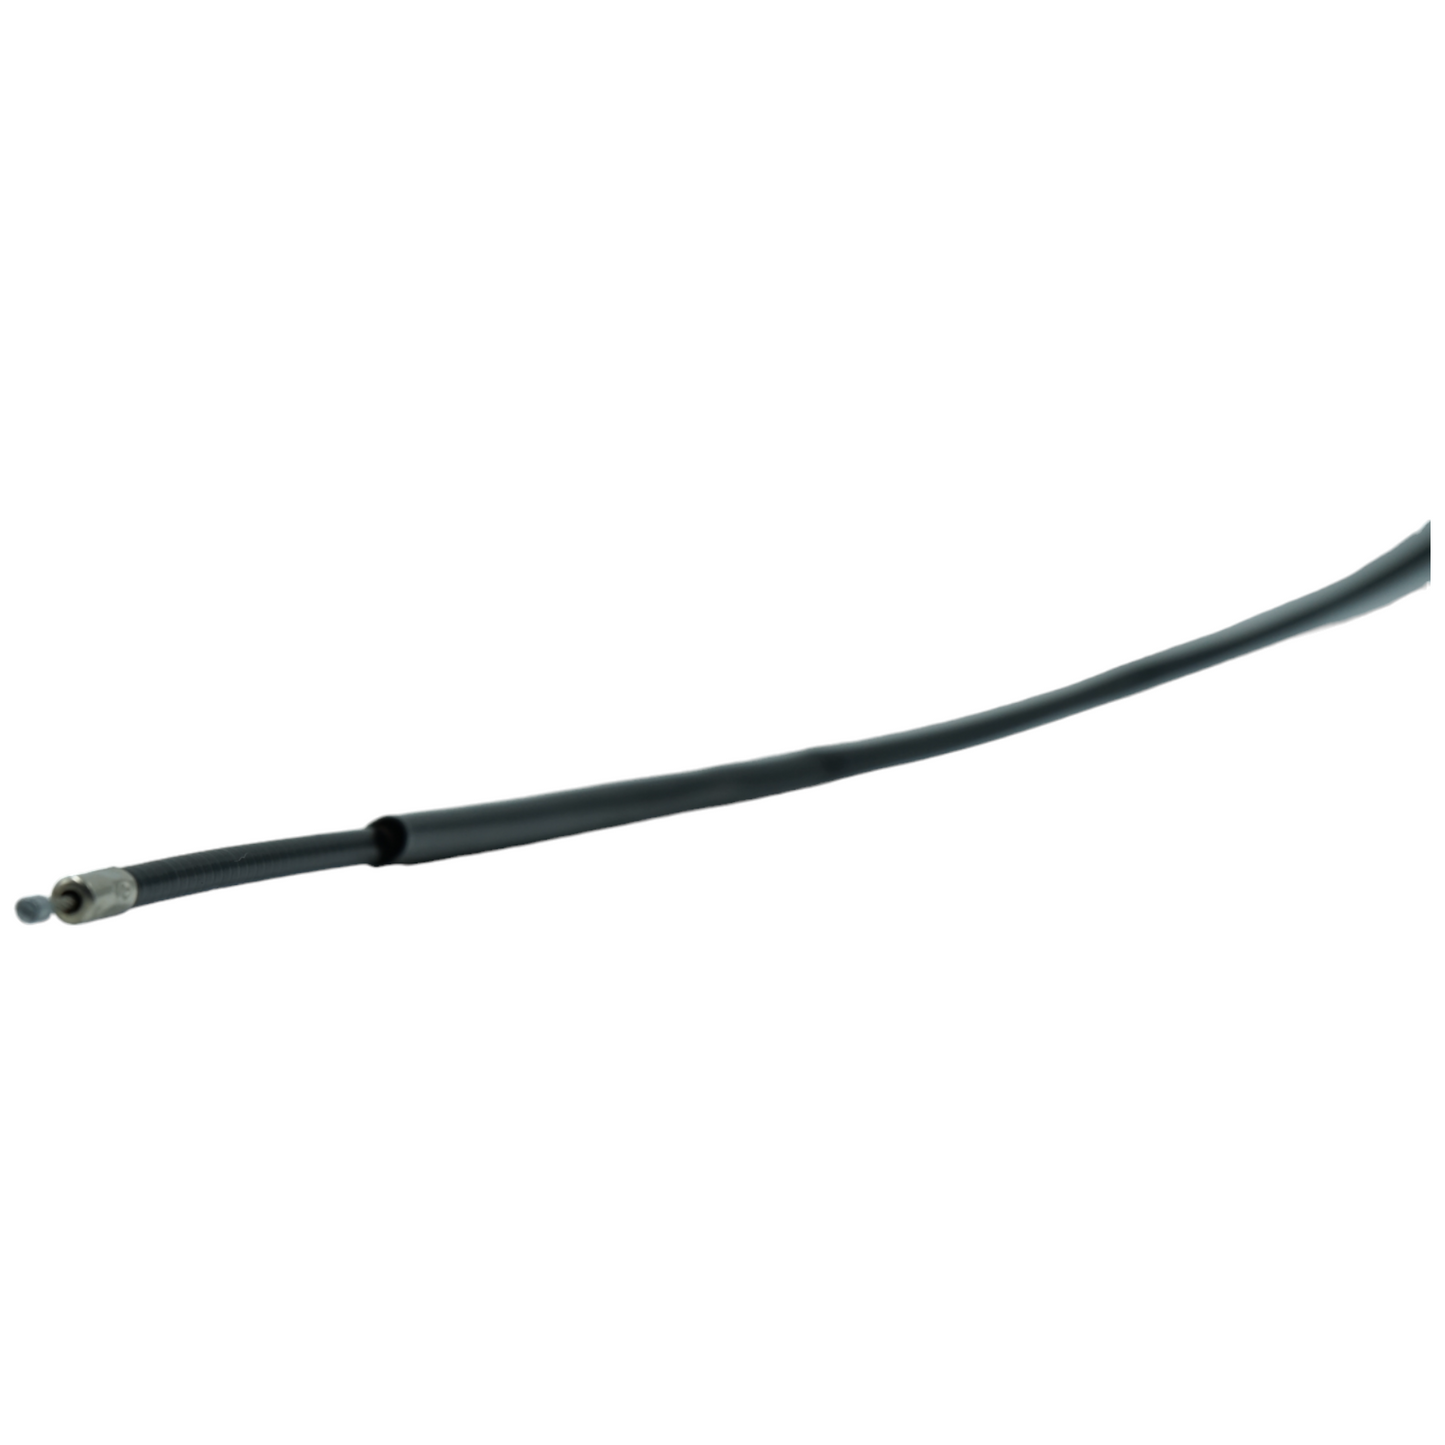 New Replacement Choke Cable Fits Honda TRX300 FW Fourtrax 1996-2000 4x4